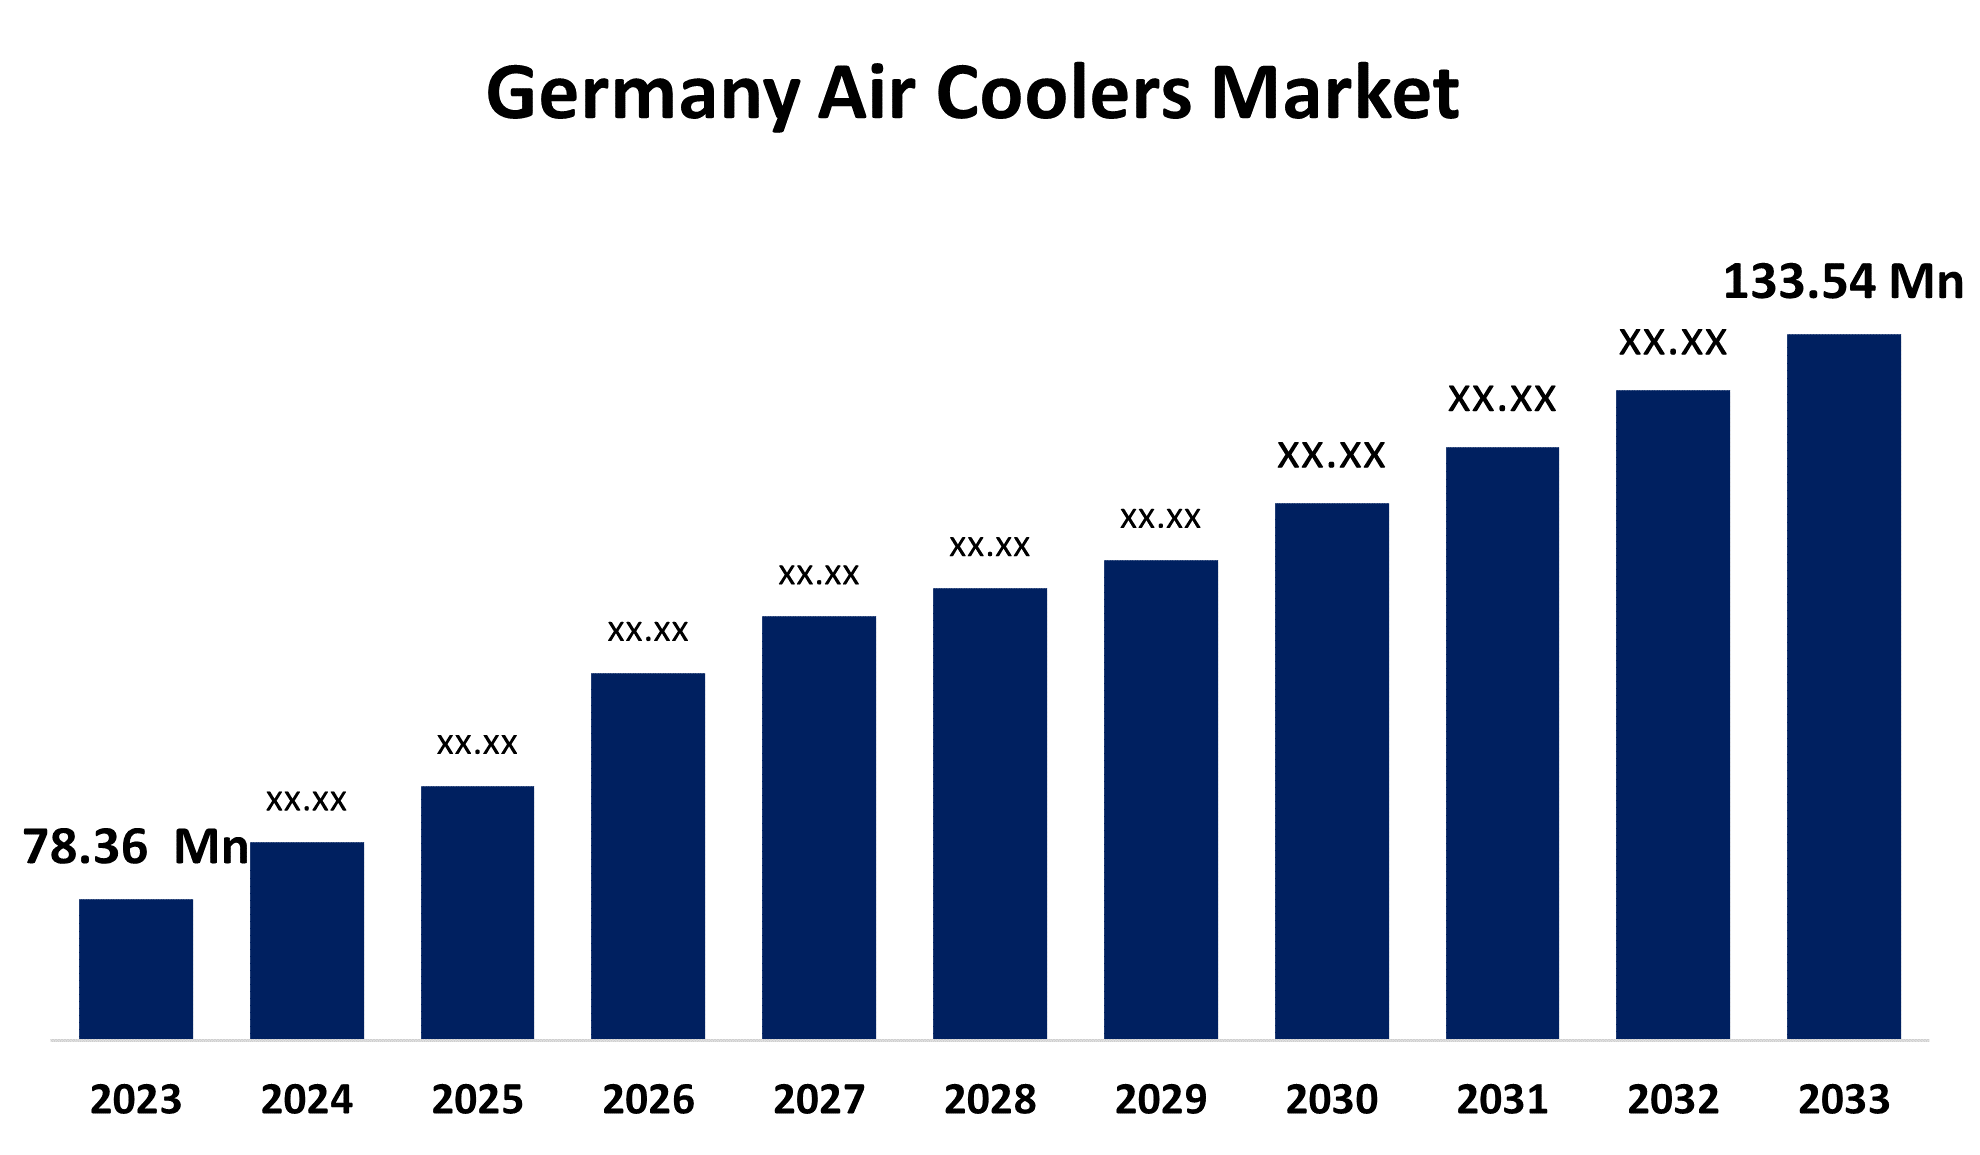 Germany Air Coolers Market